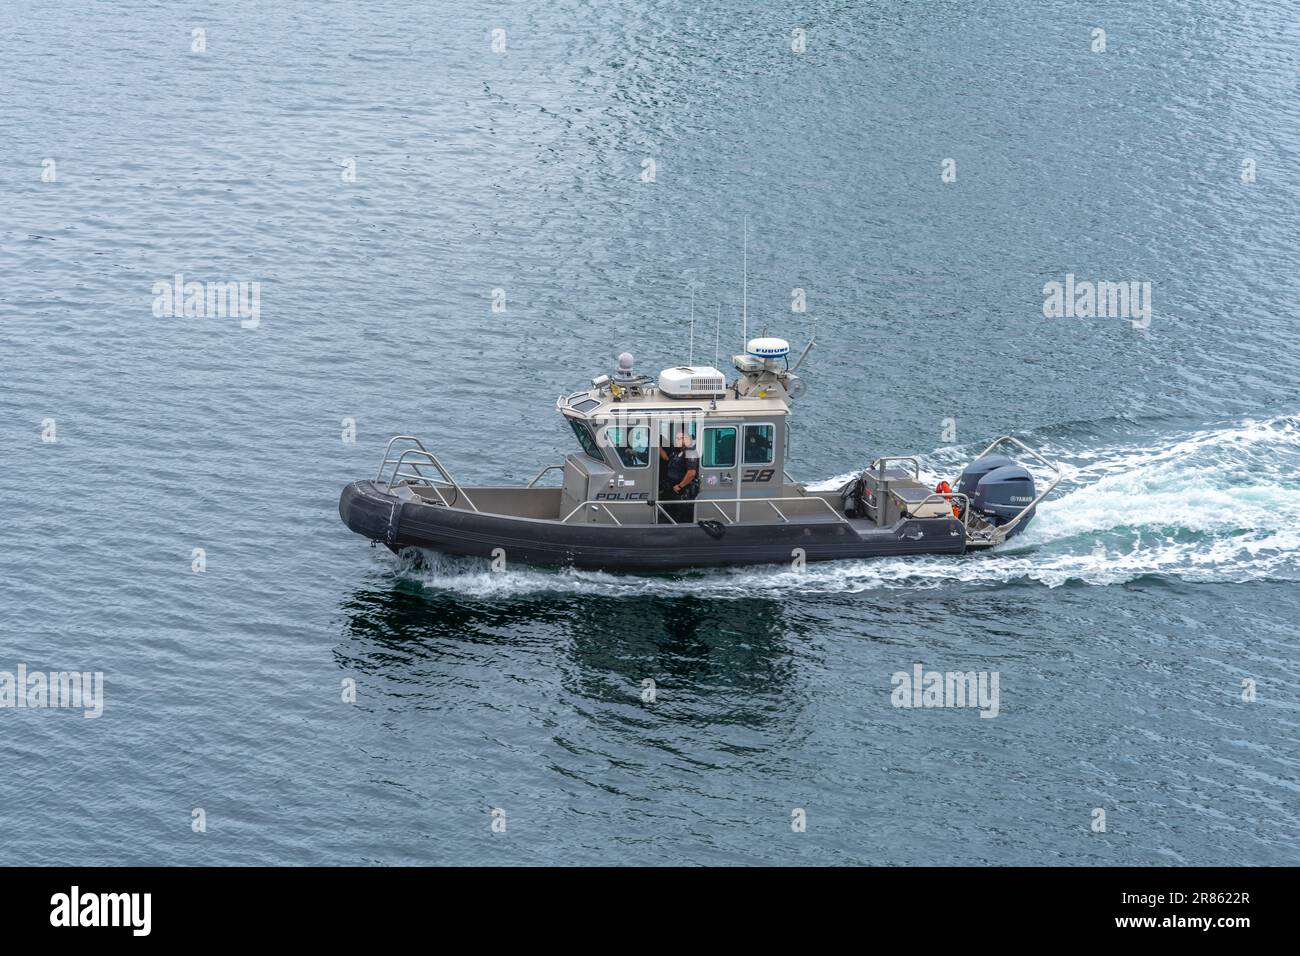 San Pedro, CA, USA – June 2, 2023: A Los Angeles Port Police boat speeds on the water at the Port of Los Angeles in San Pedro, California. Stock Photo